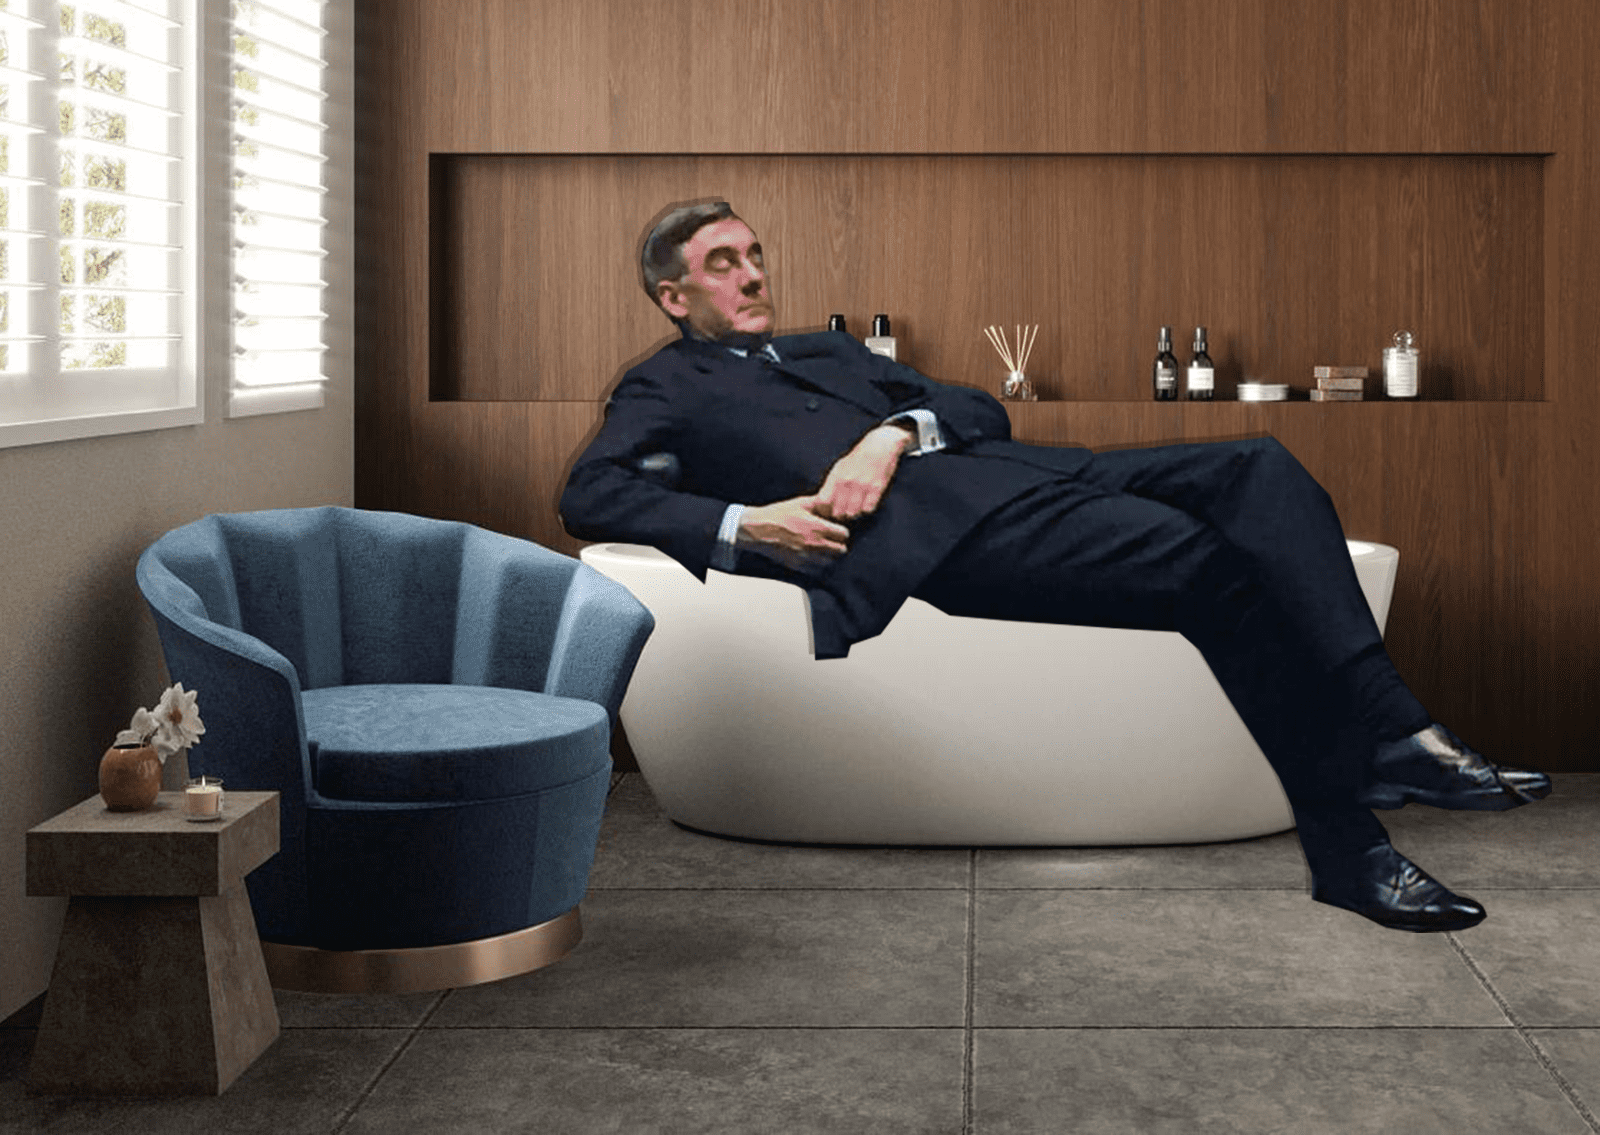 Rees-Mogg demands free-standing bath for all hotel stays